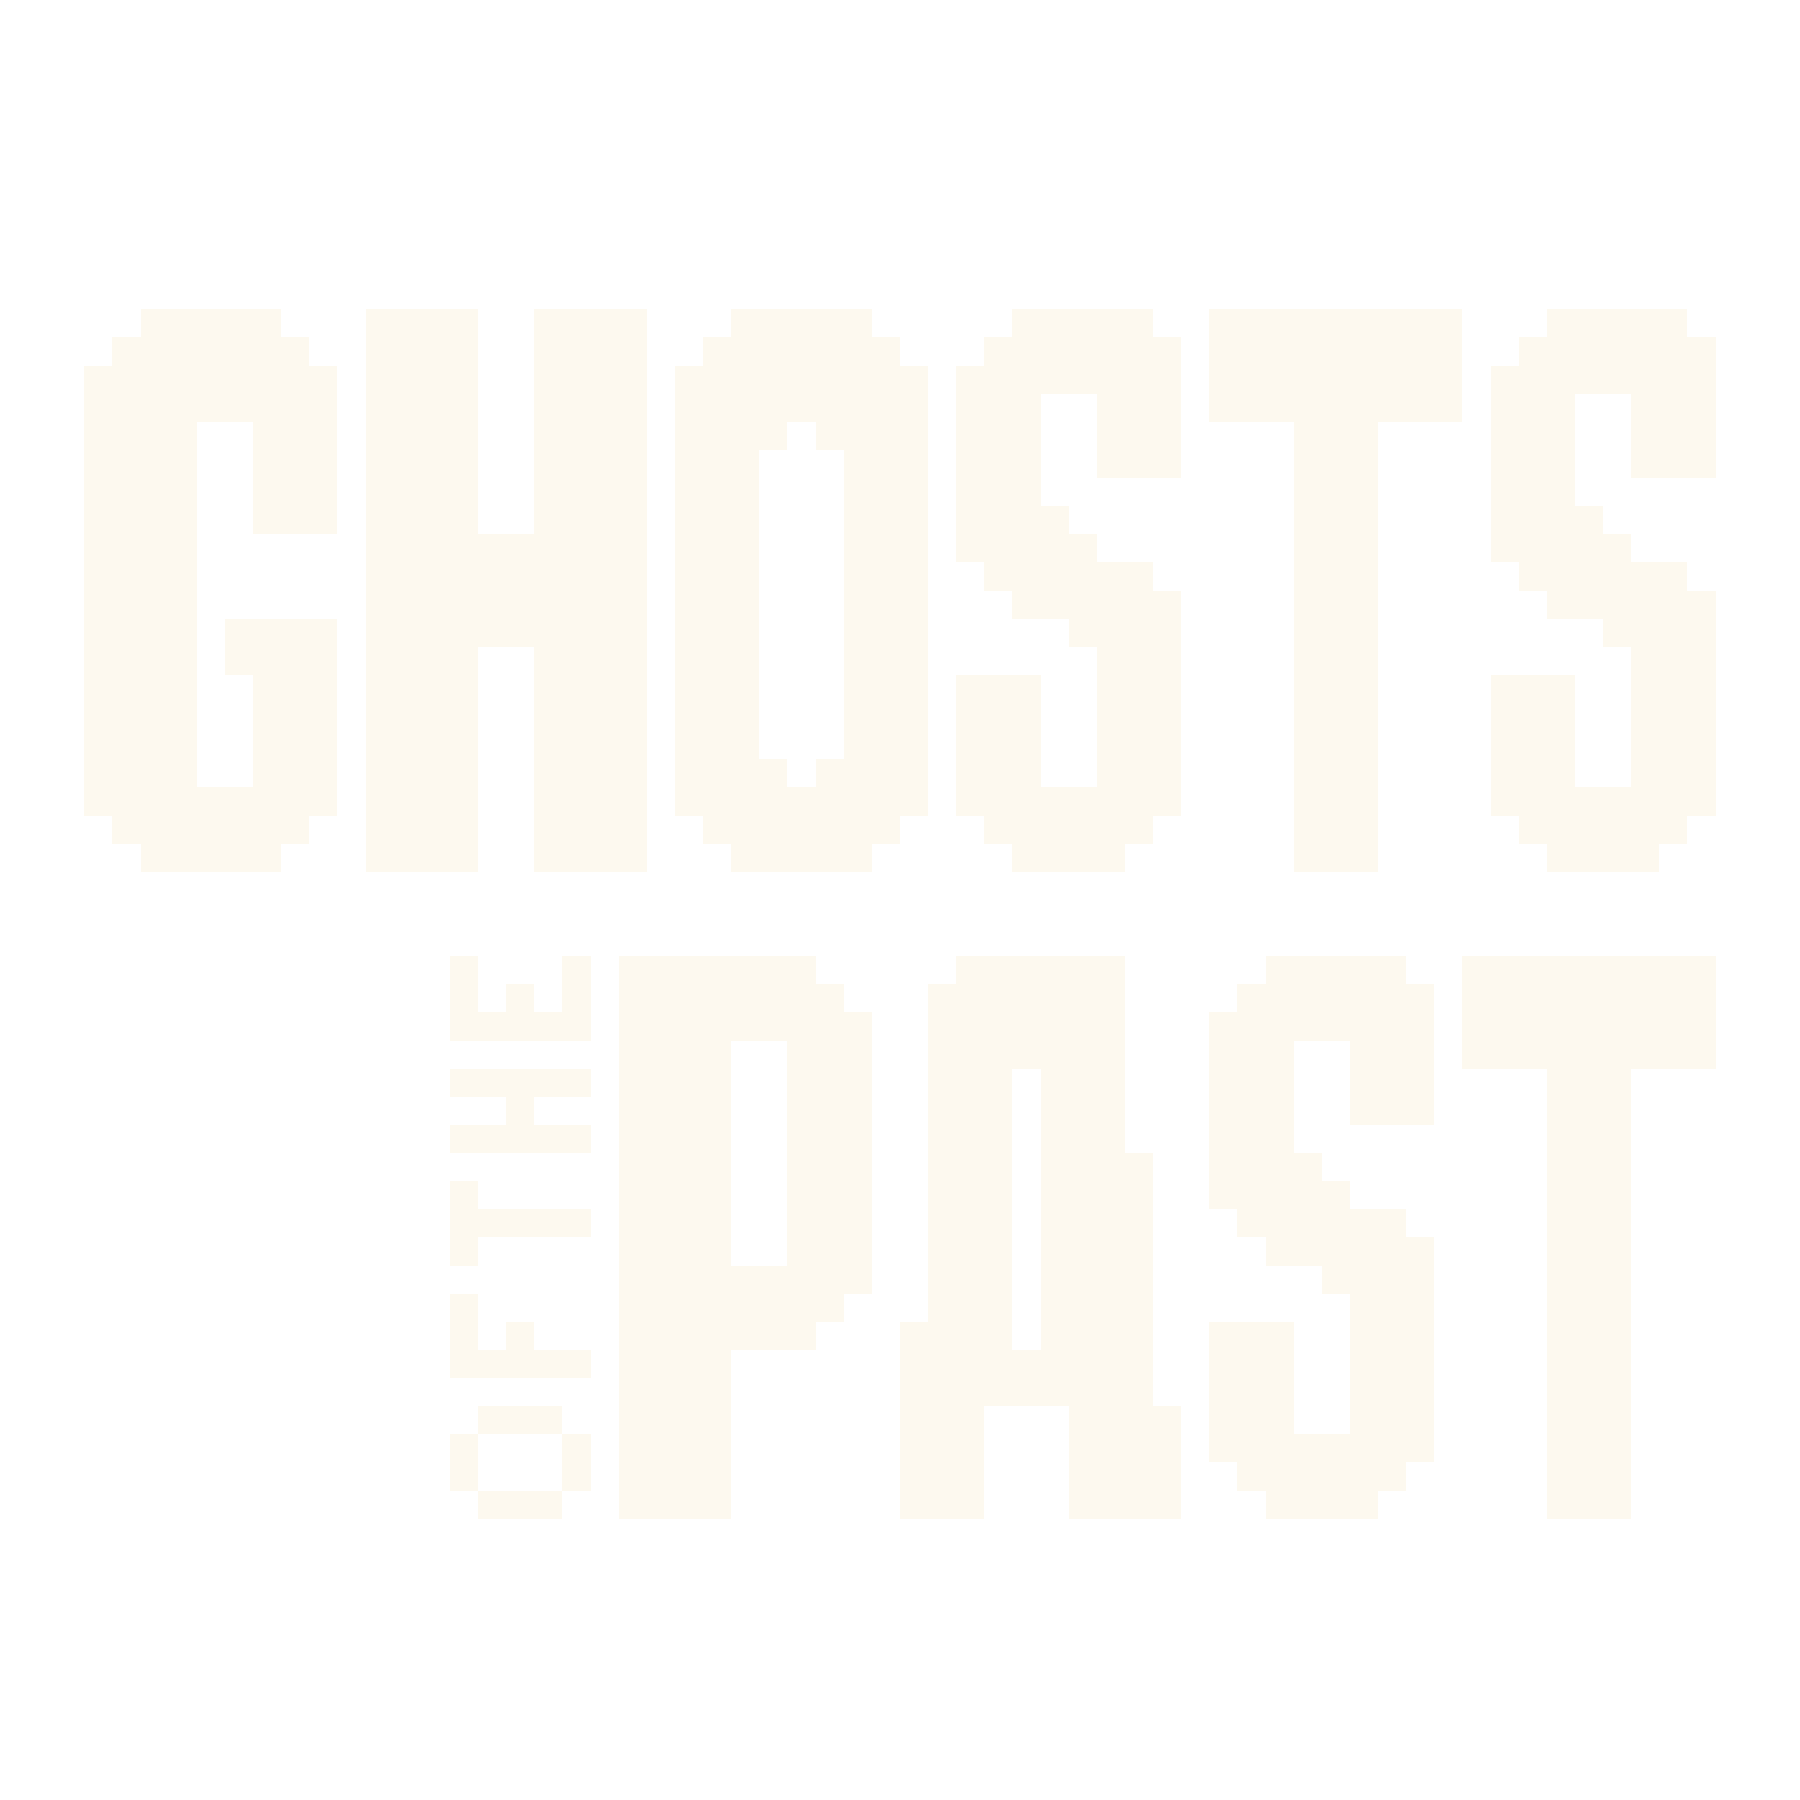 Ghosts of the past logo